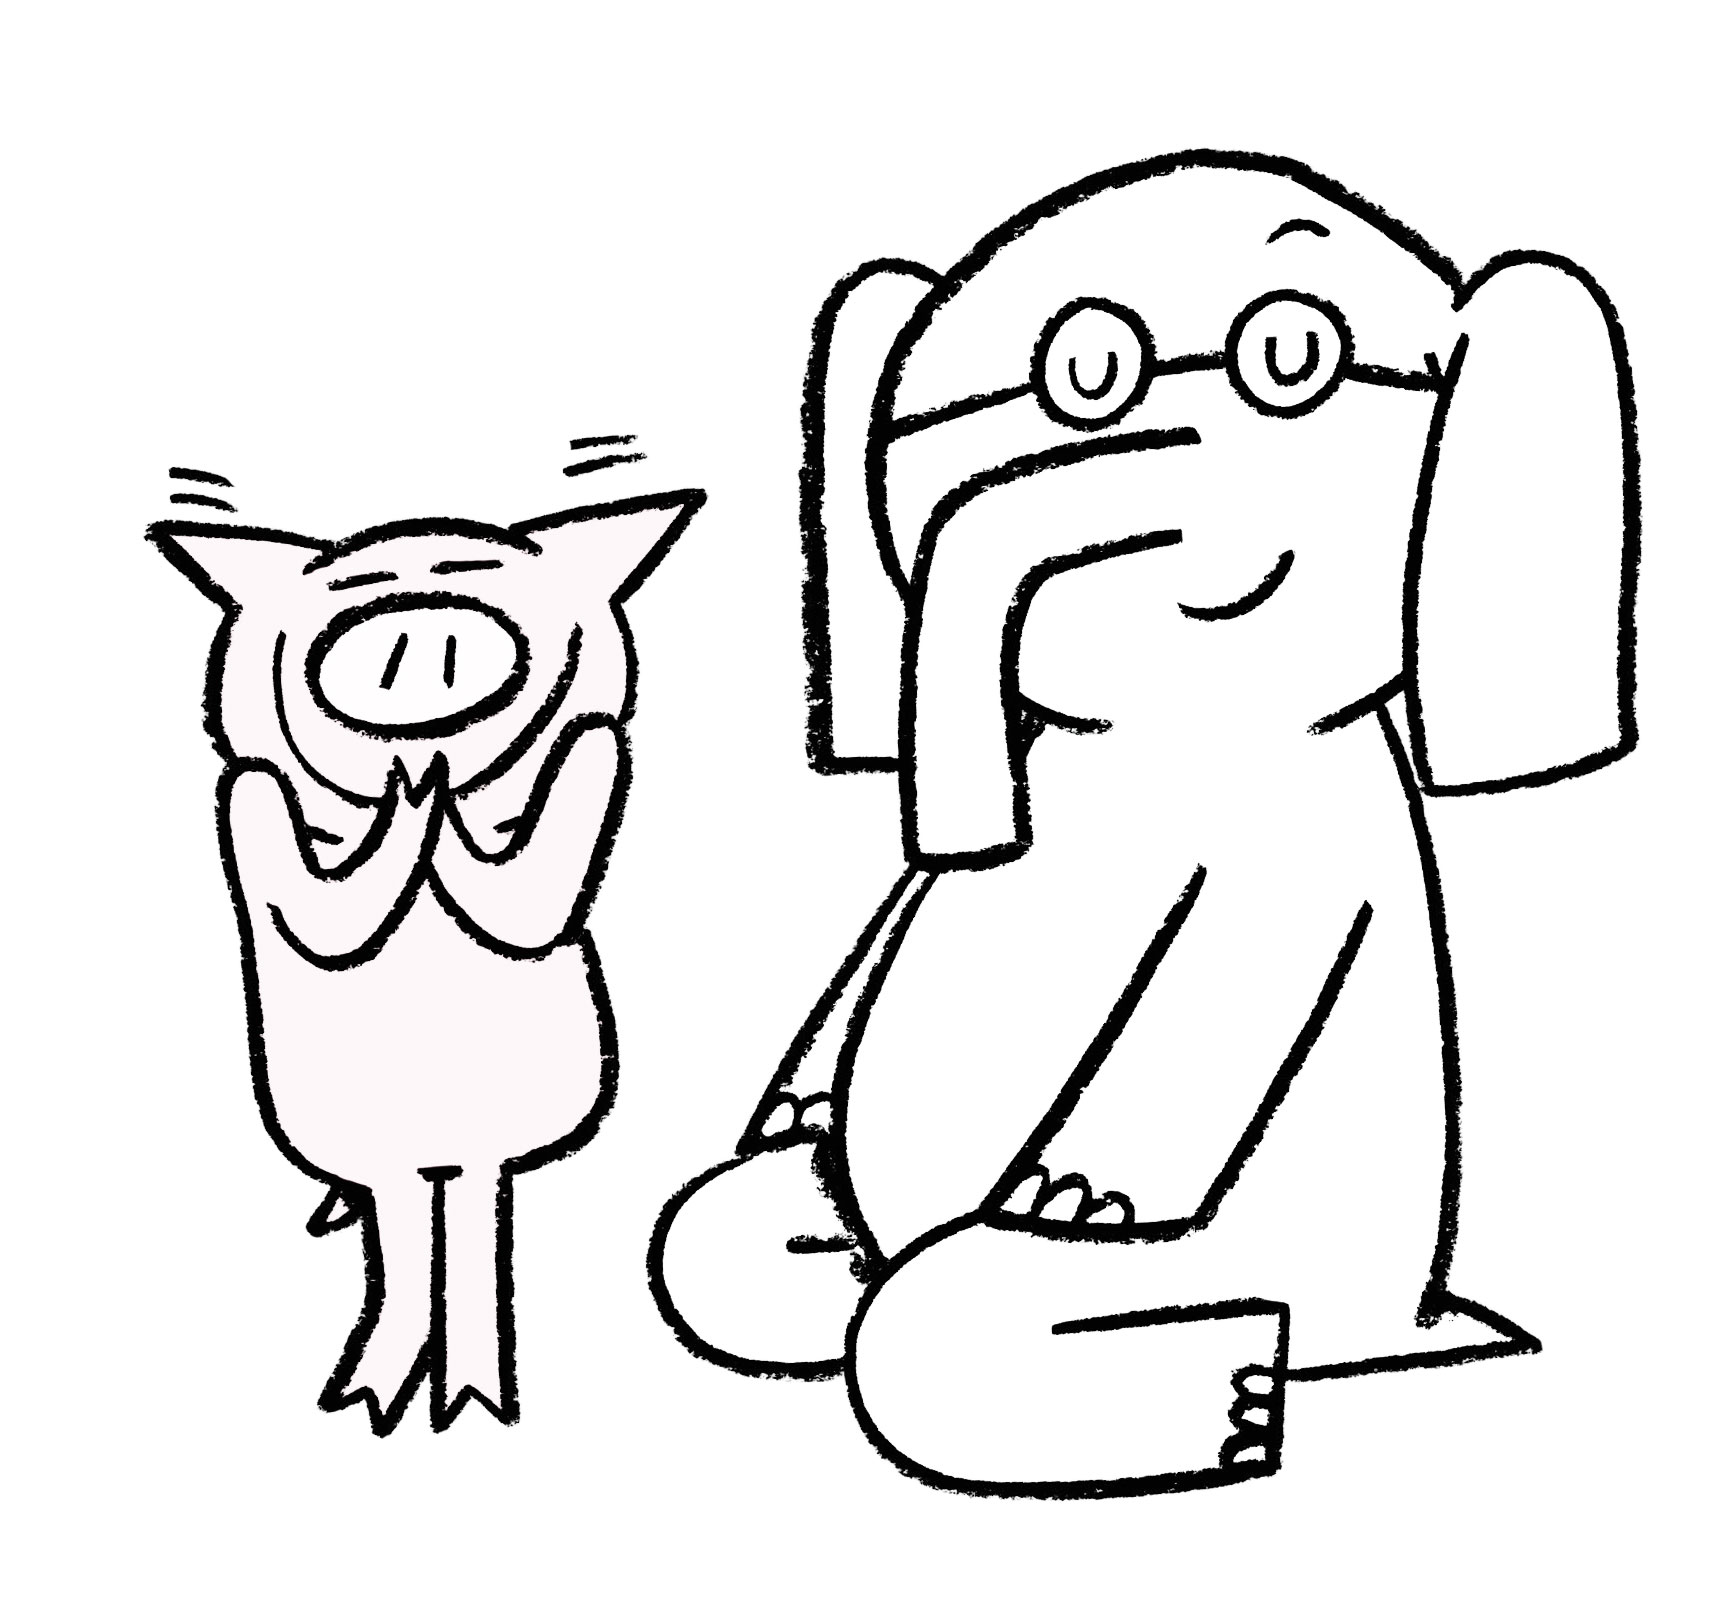 Free Elephant And Piggie Coloring Pages, Download Free Elephant And